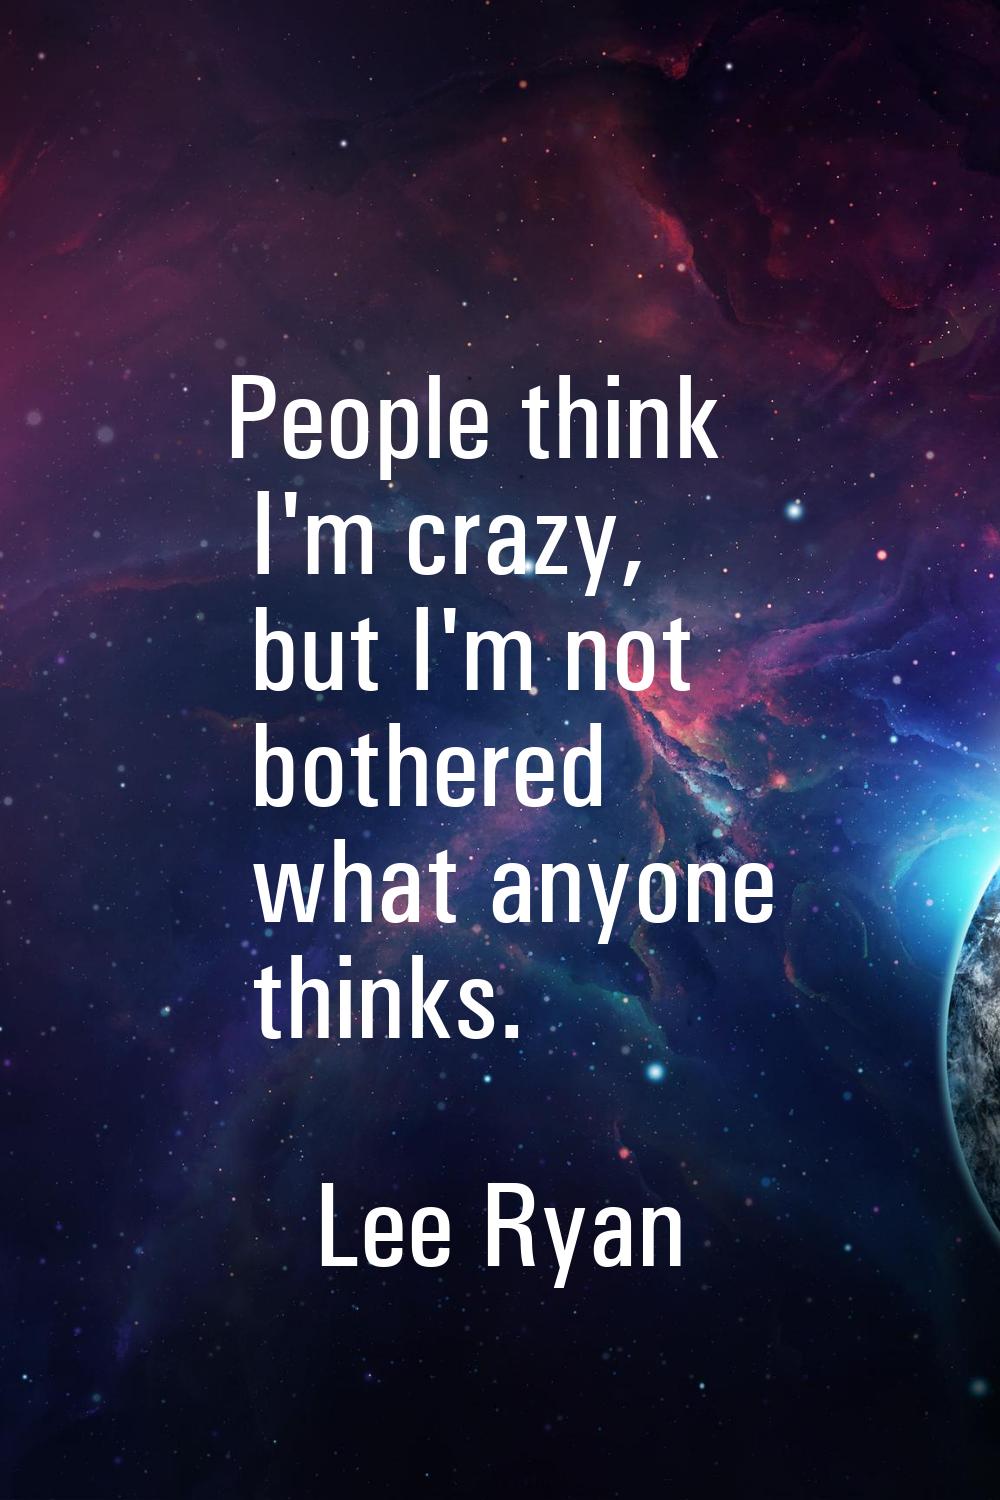 People think I'm crazy, but I'm not bothered what anyone thinks.